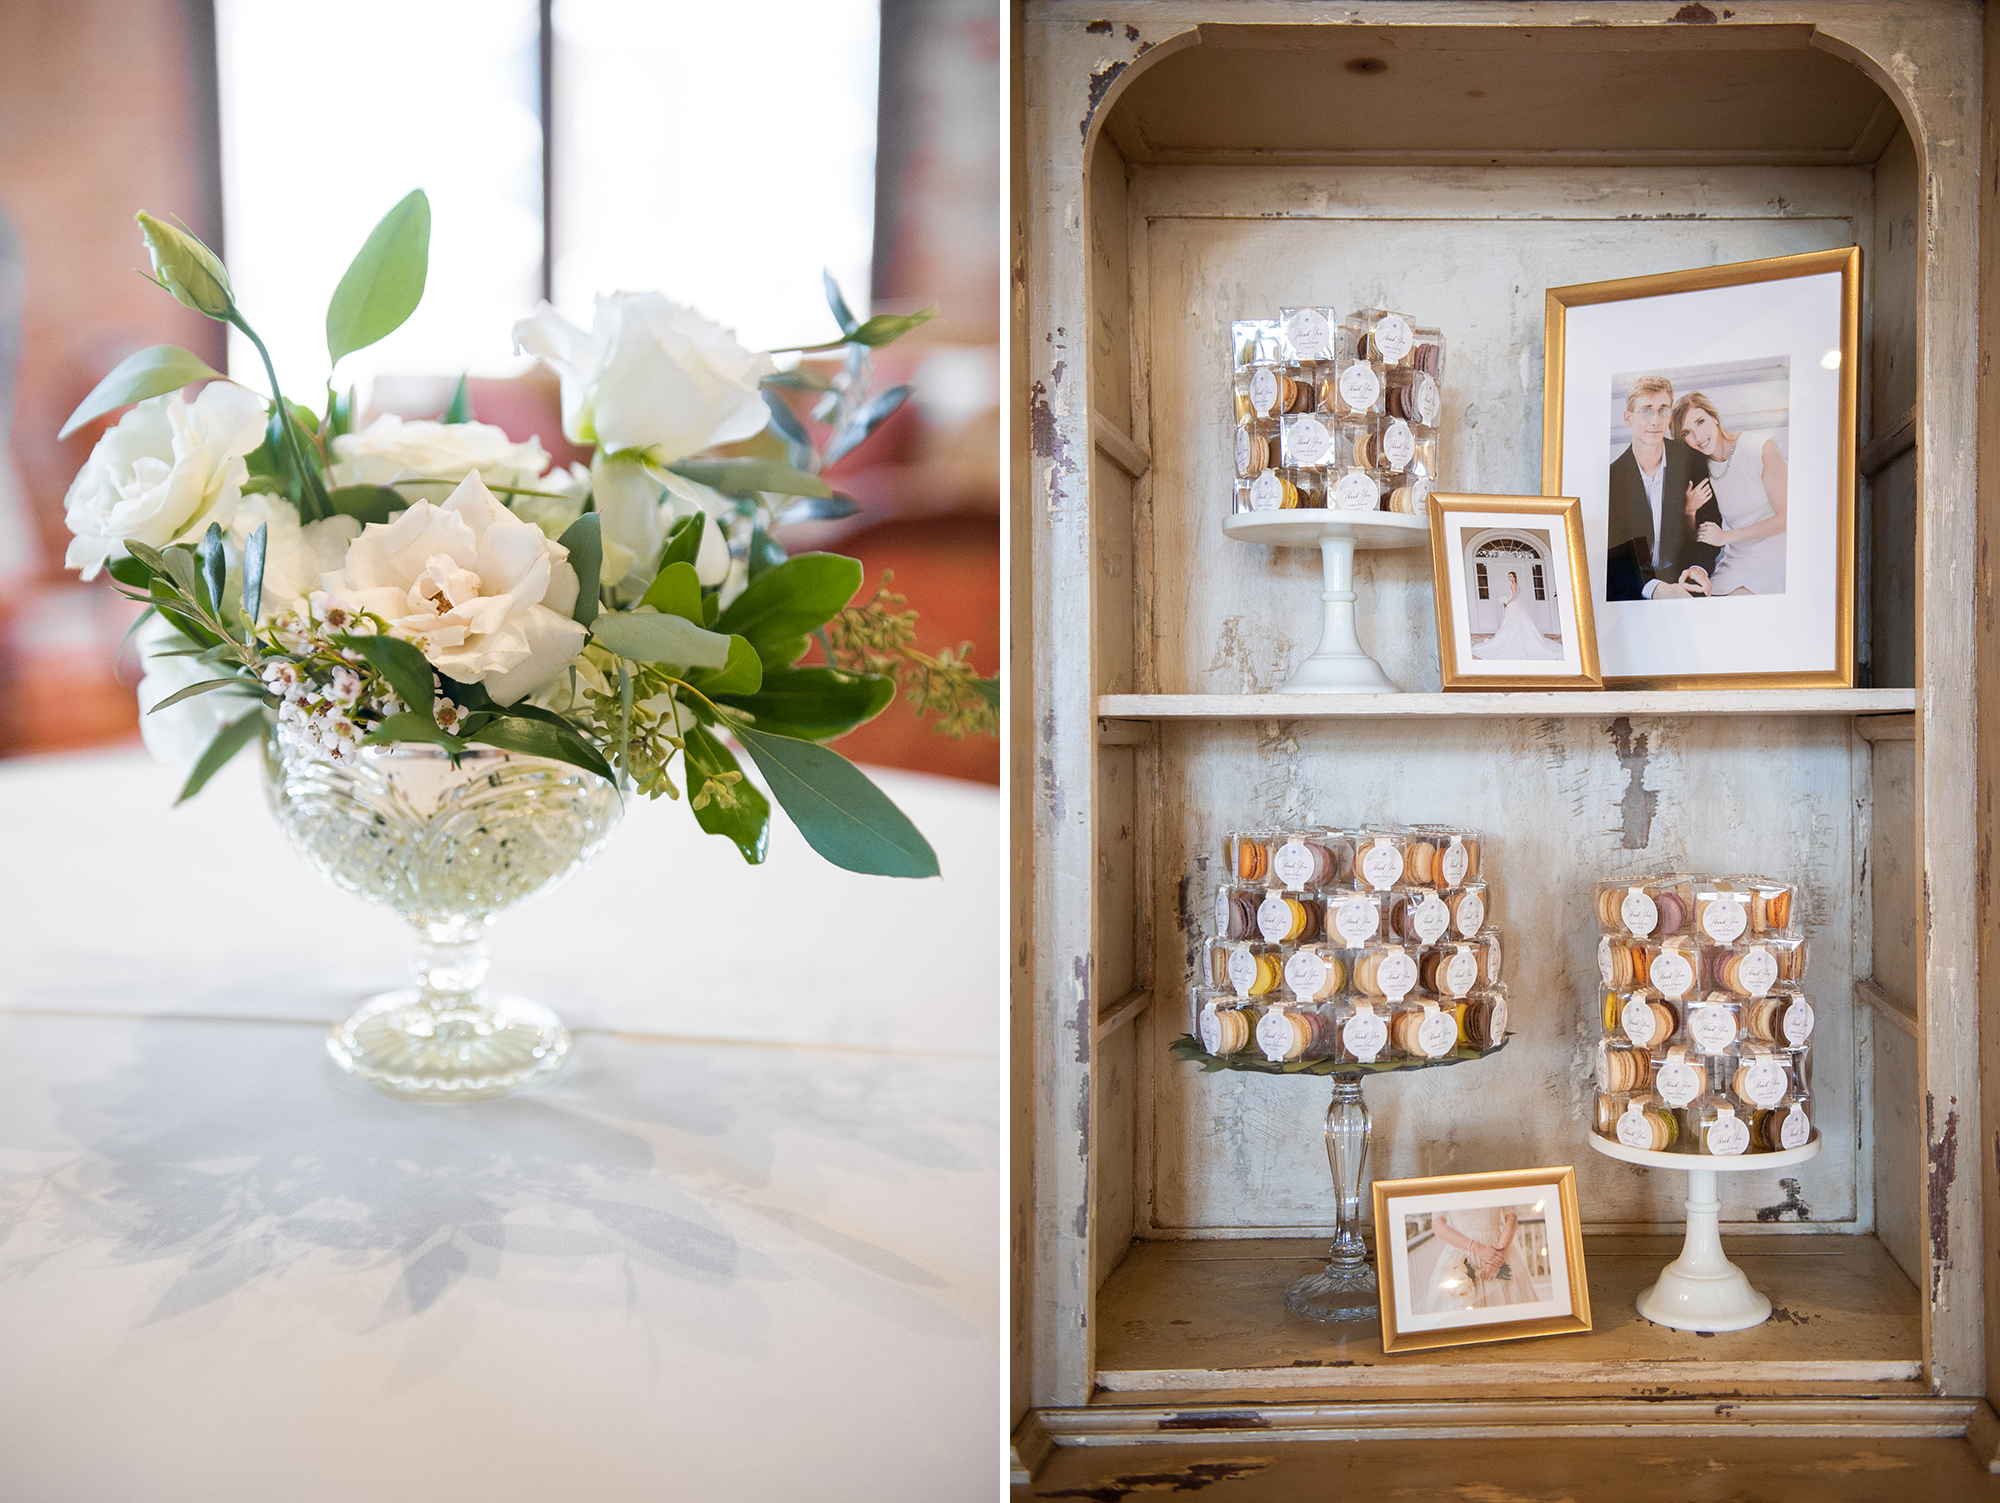 Flowers and macaroons at the reception